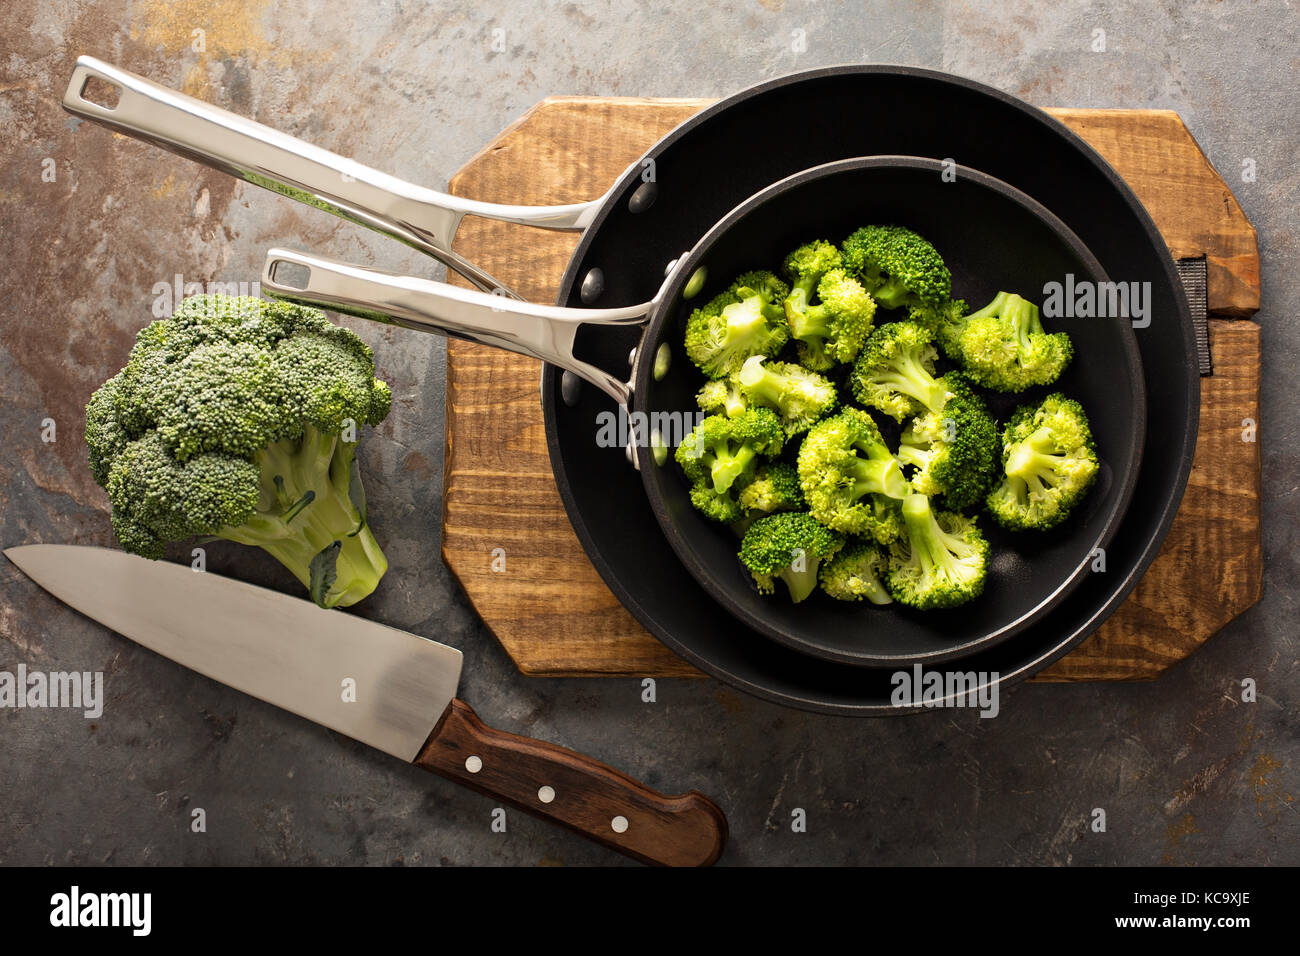 Steamed or stewed broccoli in a skillet Stock Photo